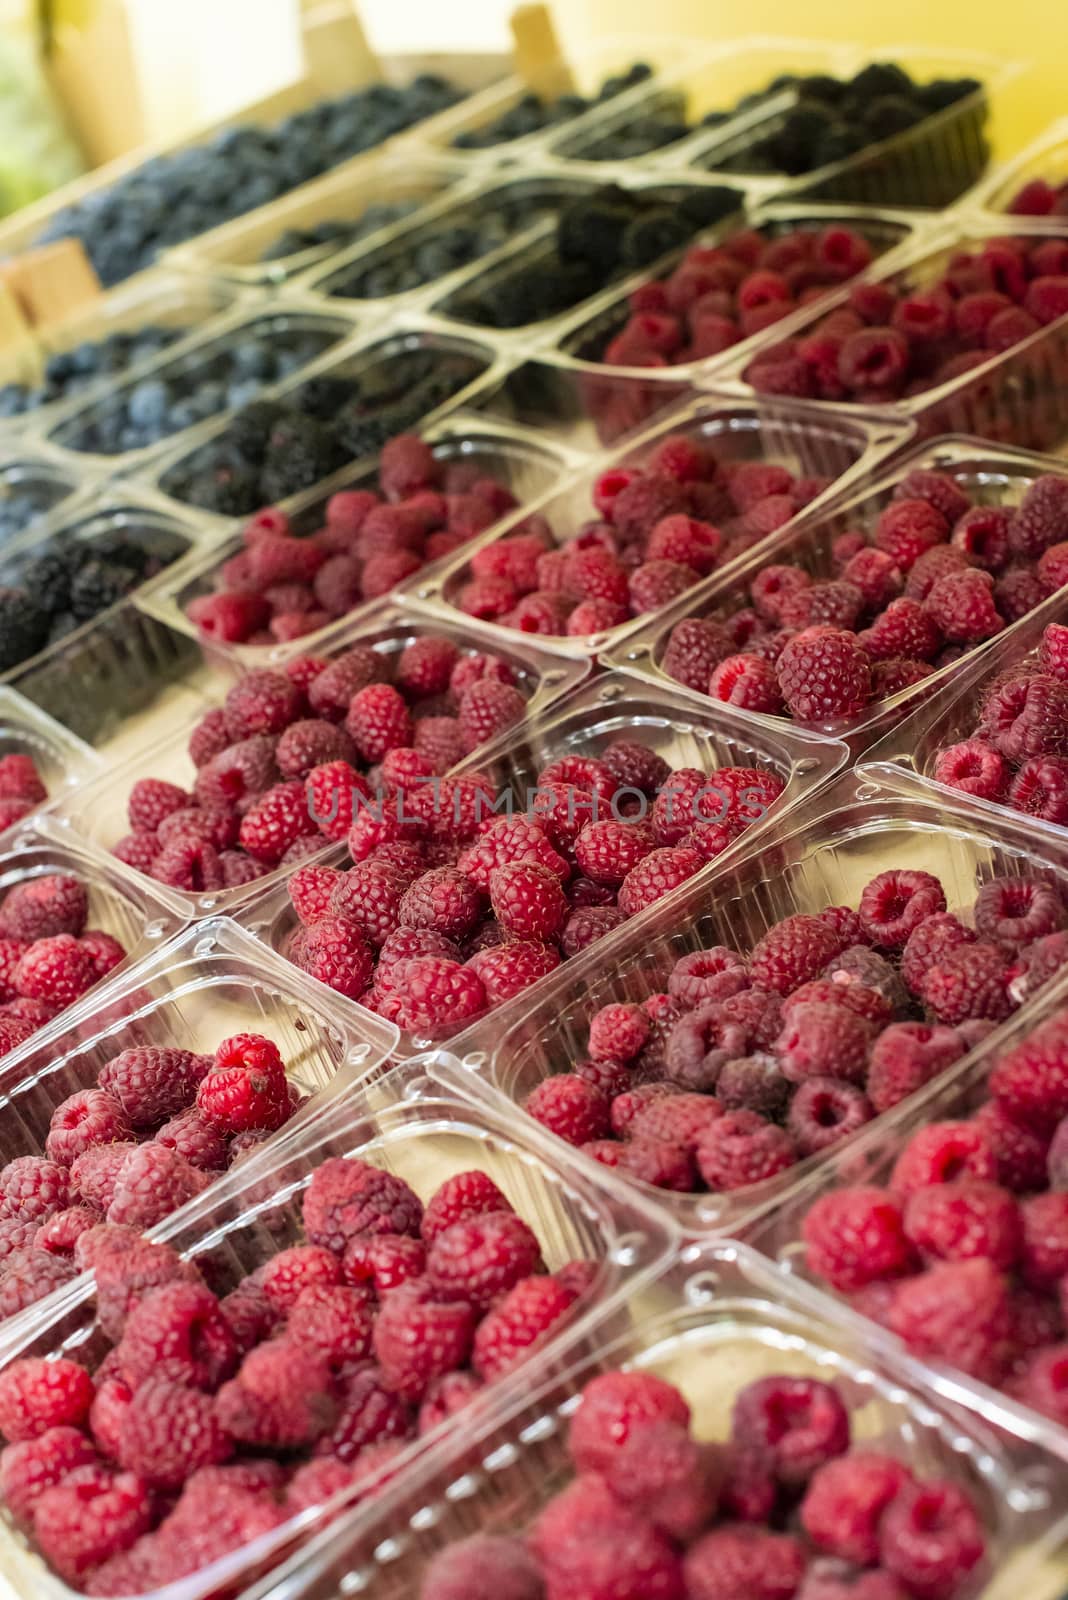 Raspberries and blueberries on shelf in the market. Sorted fruits in transparent plastic boxes.